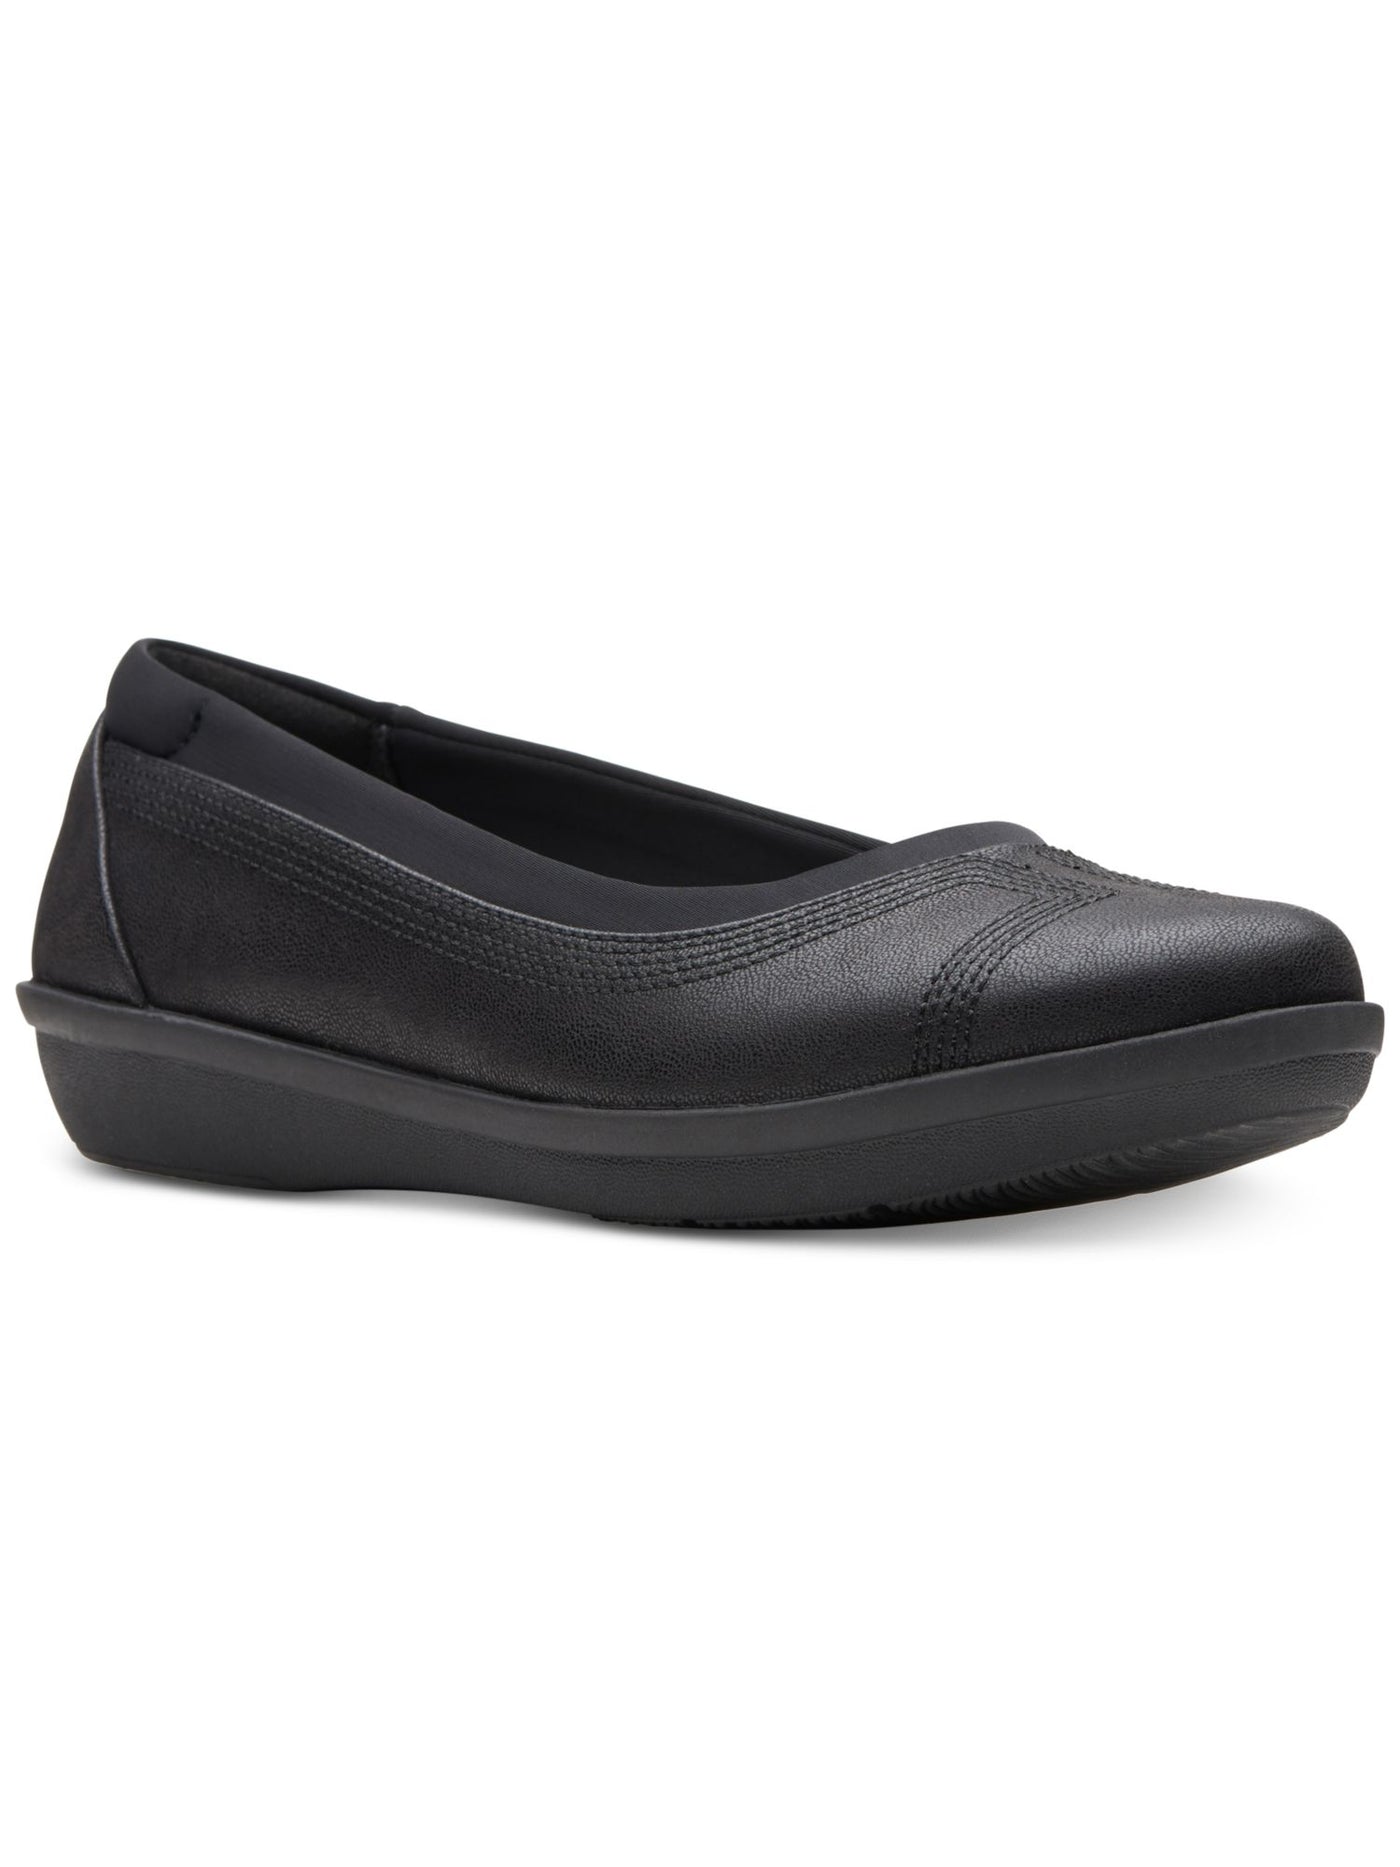 CLOUD STEPPERS BY CLARKS Womens Black Cushioned Removable Insole Ayla Round Toe Wedge Slip On Ballet Flats 9 M